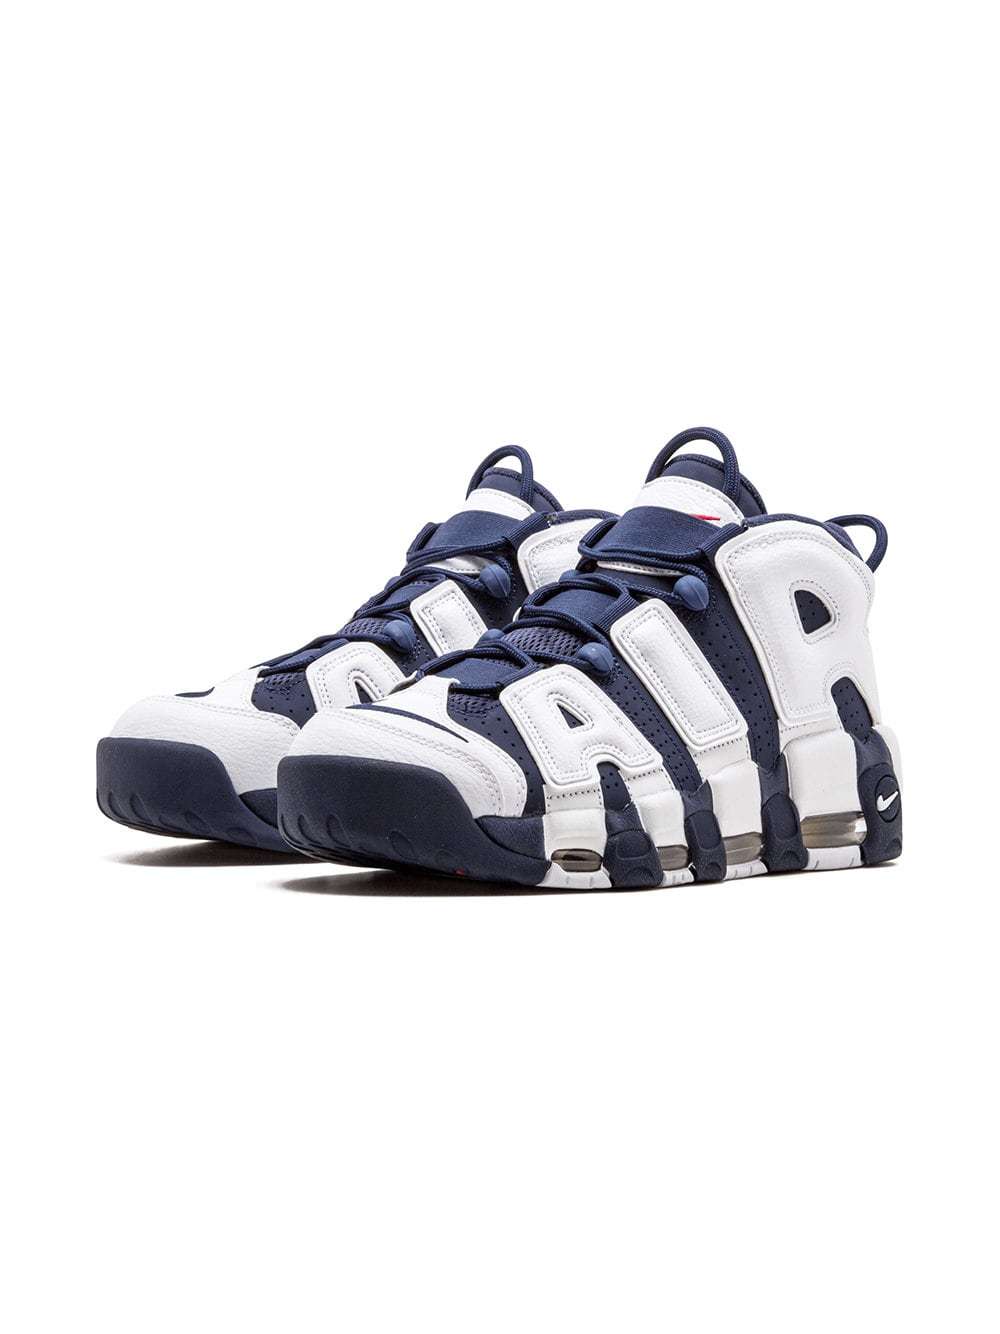 Nike Air More Uptempo White/Midnight Navy Sneakers - Farfetch